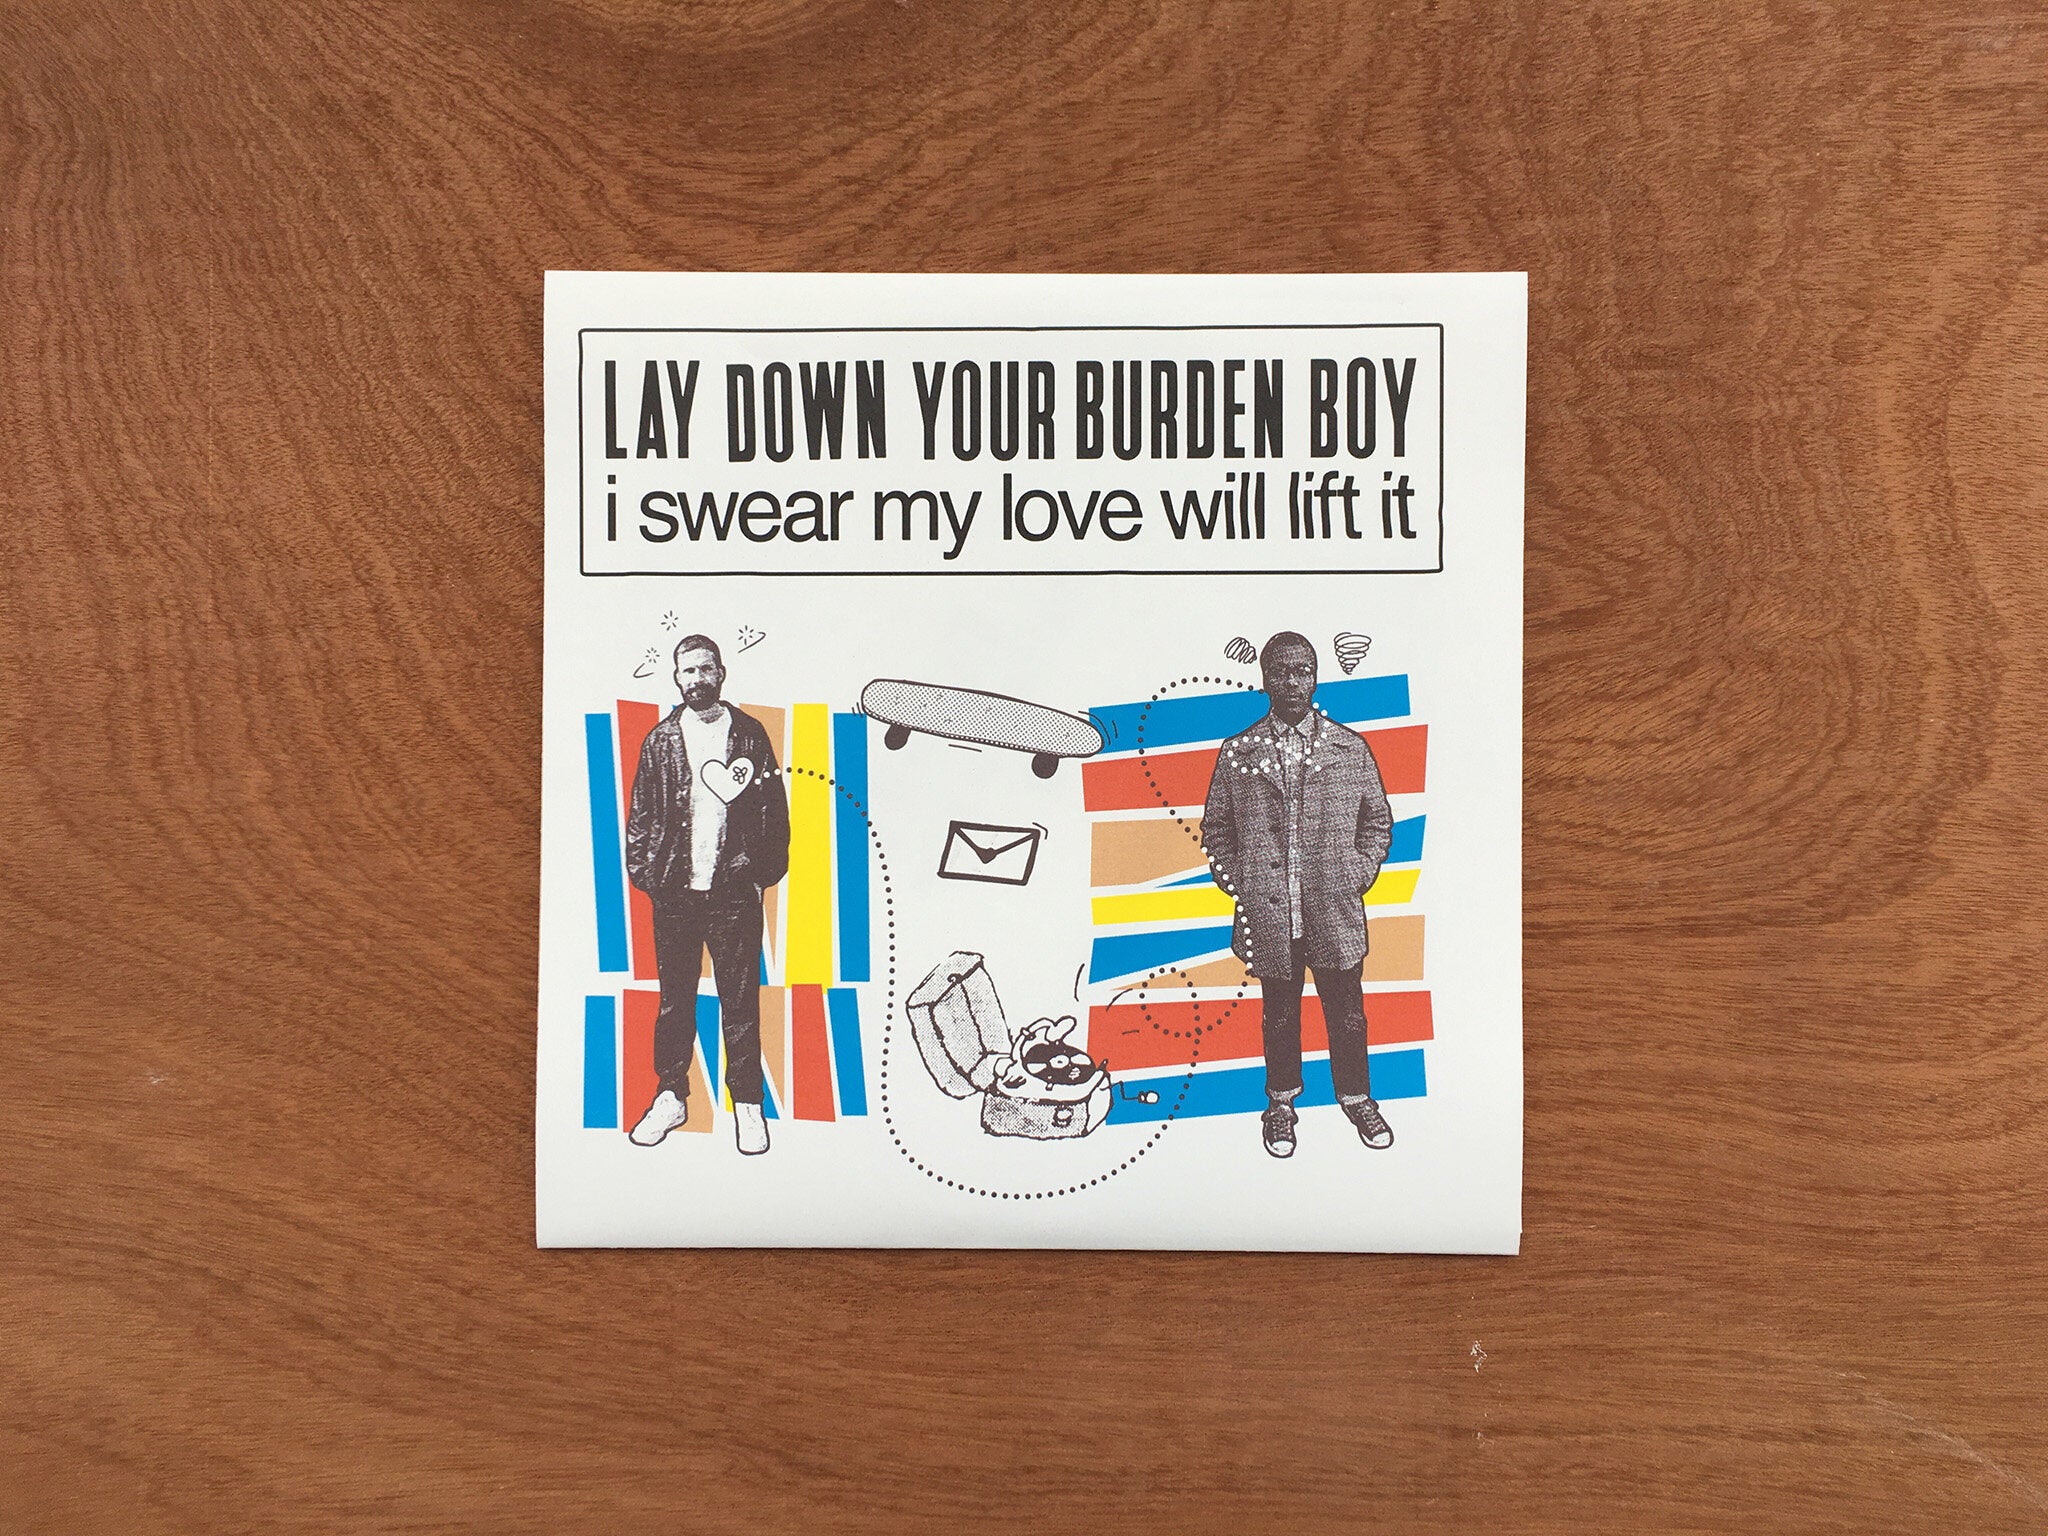 LAY DOWN YOUR BURDEN BOY 7″ by Brontez Purnell and Jason Kendig